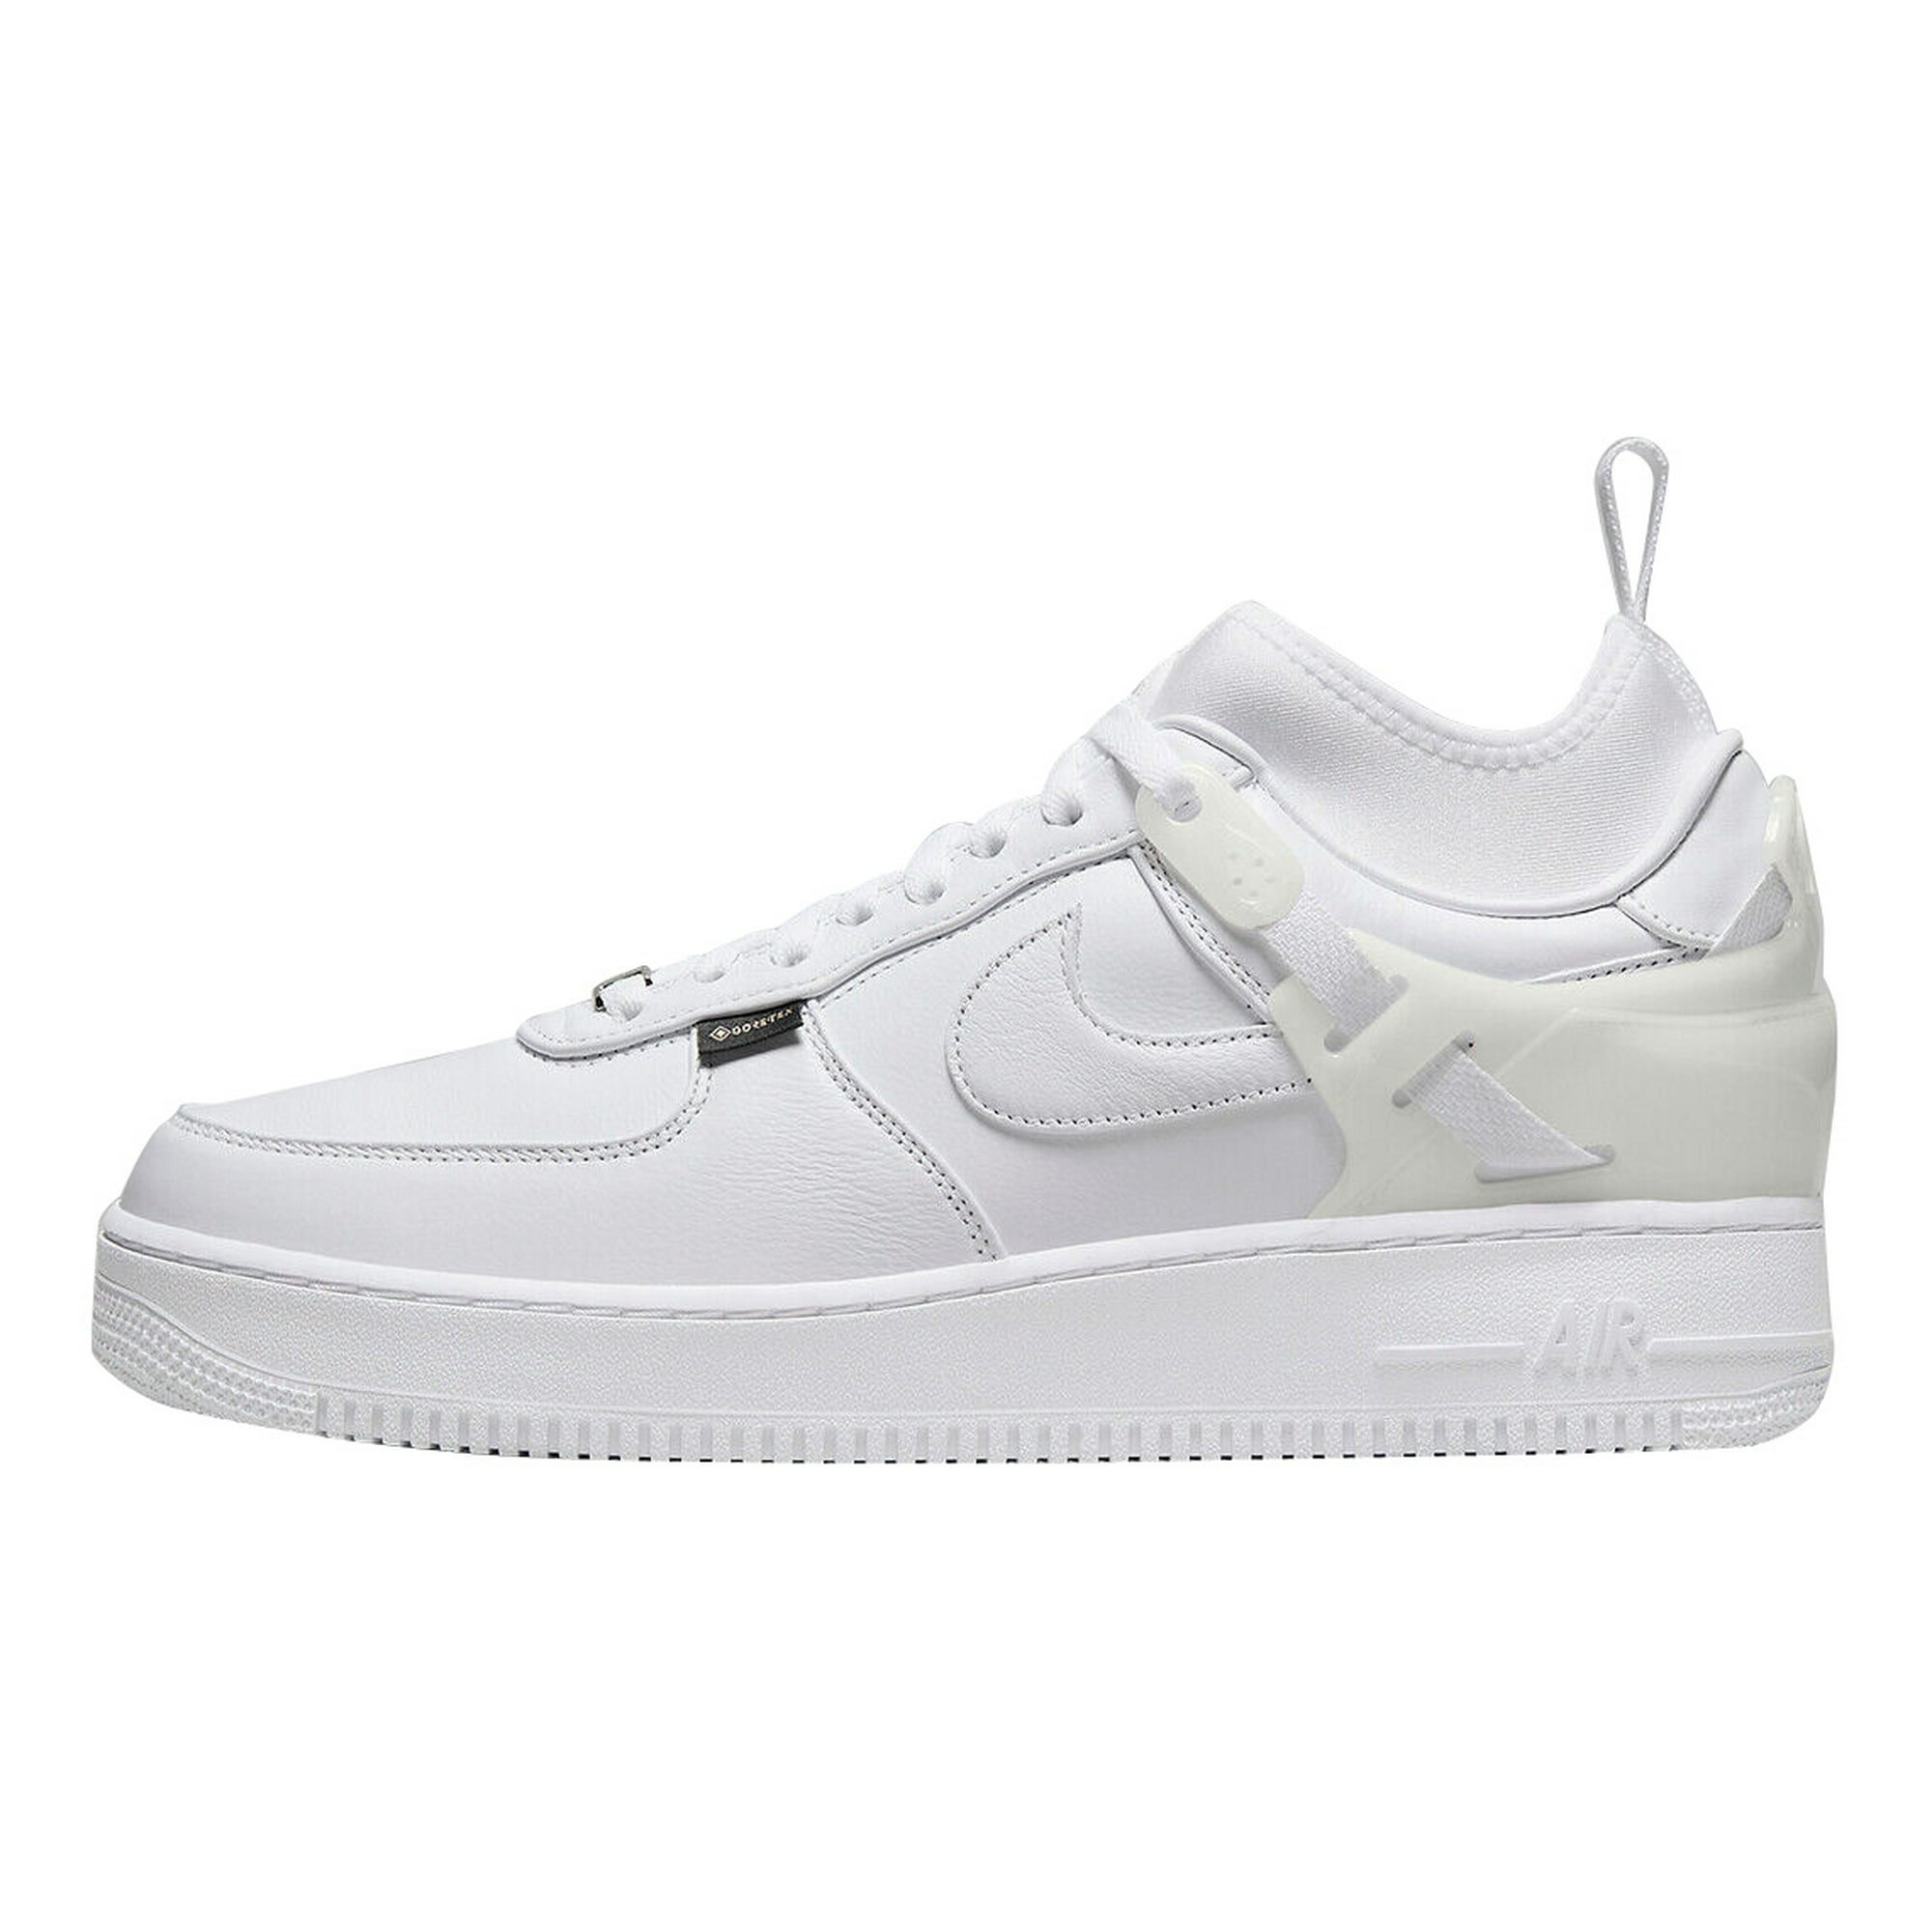 Men's Nike Air Force 1 Low SP Undercover White/White-Sail-White (DQ7558  101) - 8 